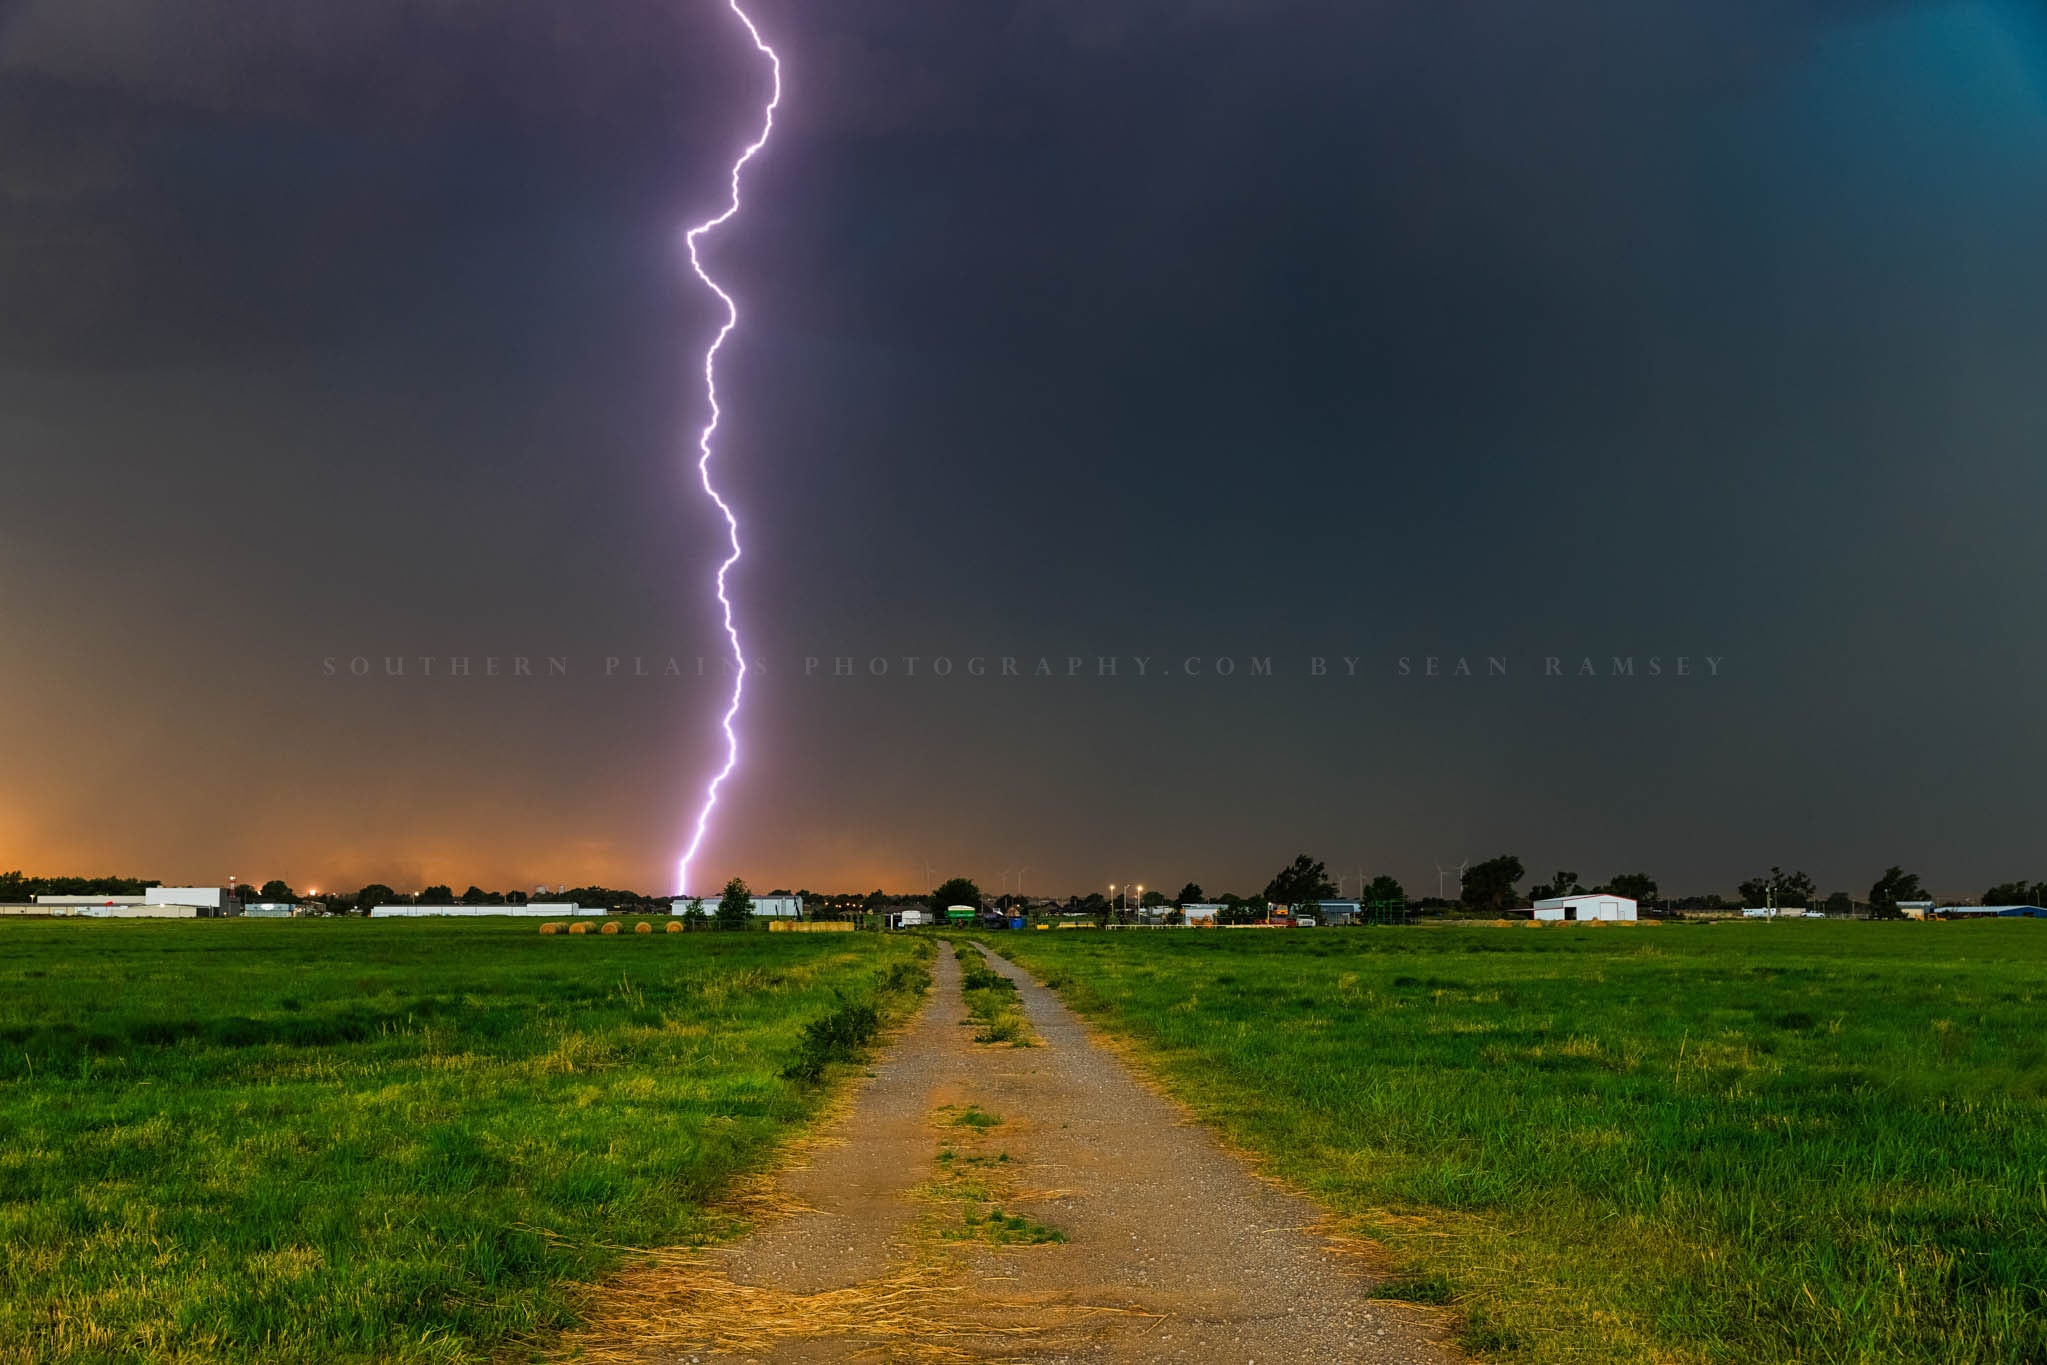 Storm photography print of a lightning bolt striking down a dirt road on a stormy summer evening in Oklahoma by Sean Ramsey of Southern Plains Photography.